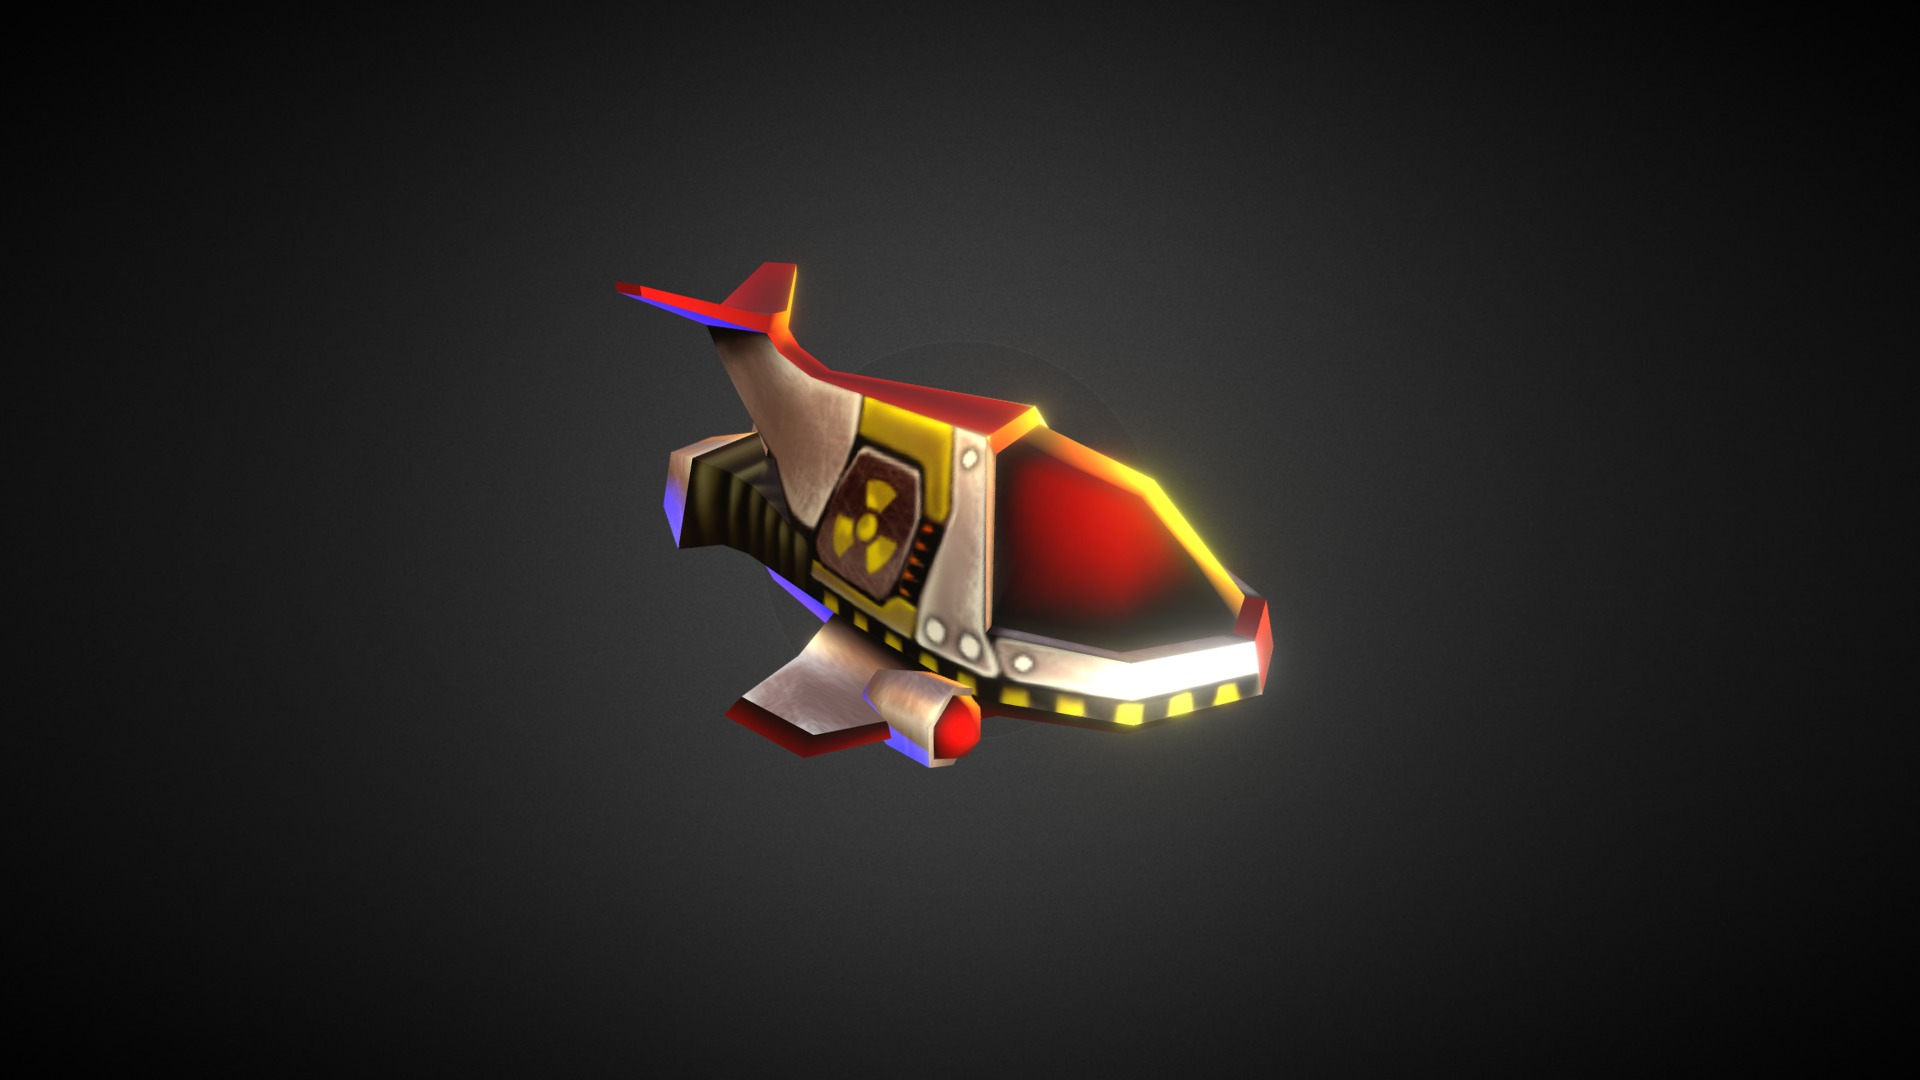 3D model Lowpoly Spaceship - This is a 3D model of the Lowpoly Spaceship. The 3D model is about a toy airplane with a red tail.